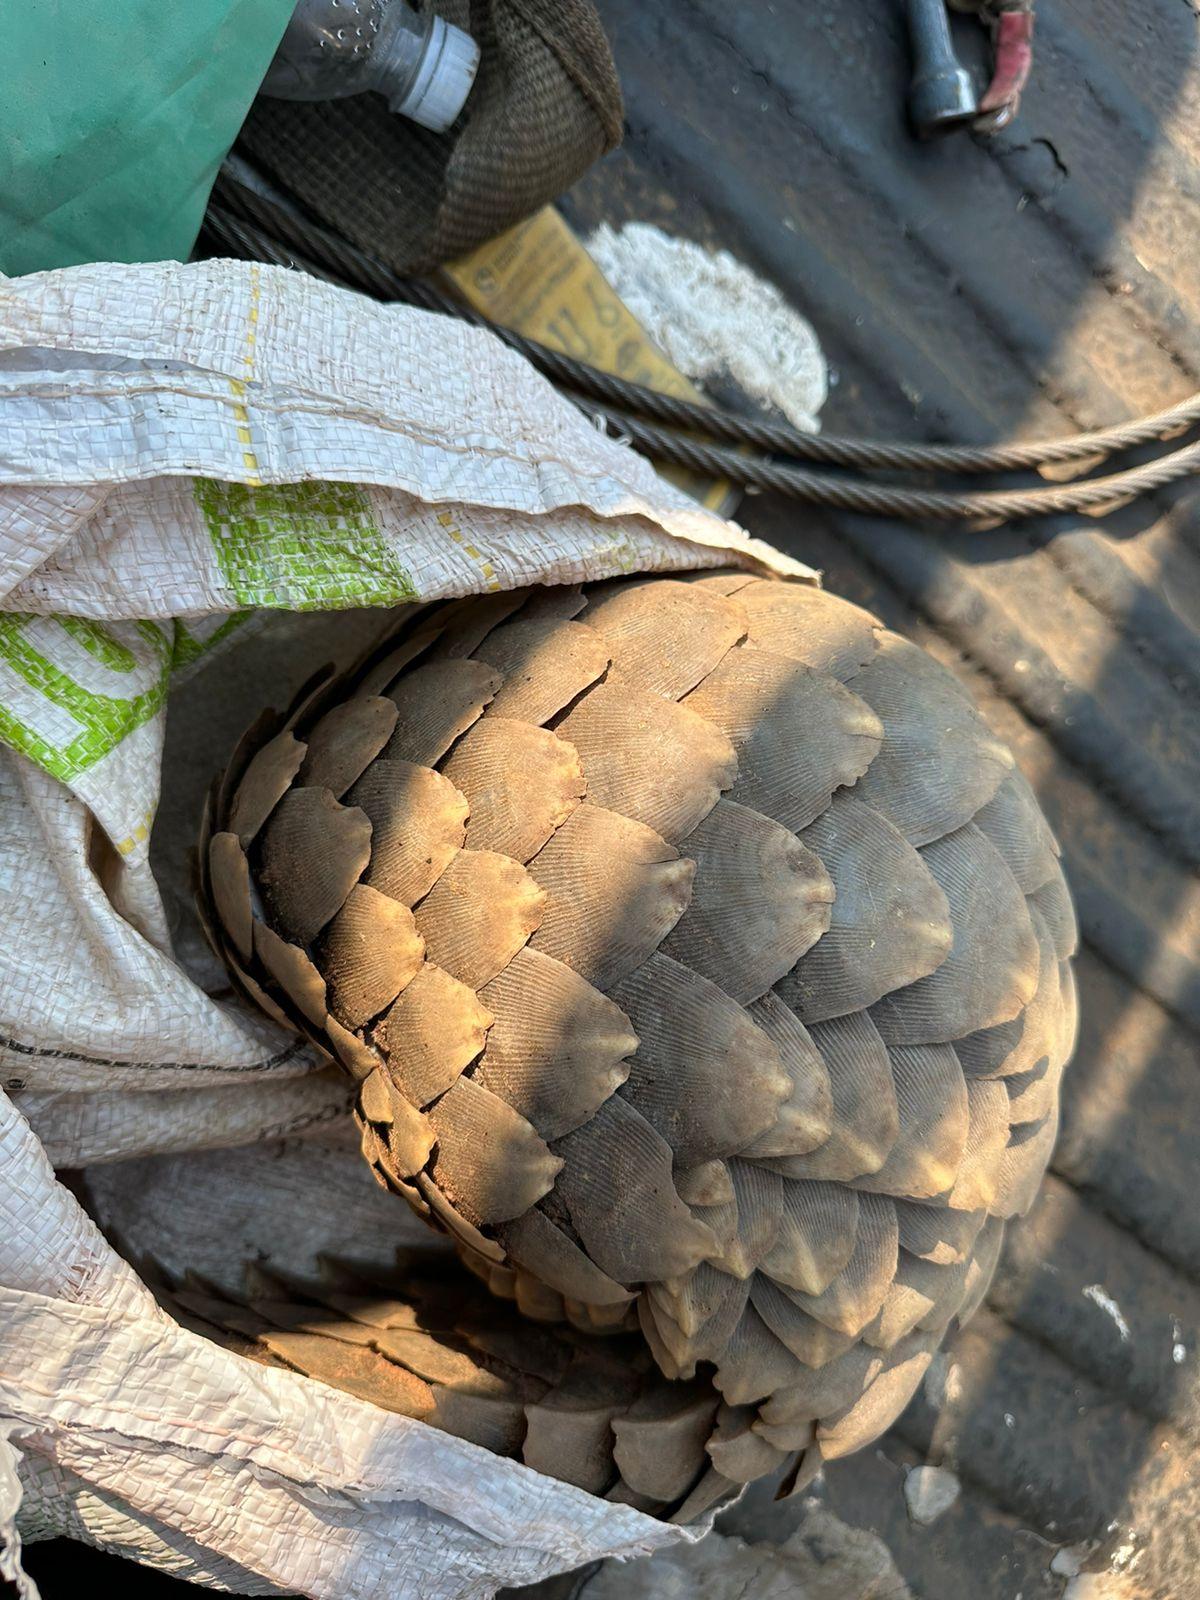 Three arrested for the illegal possession of a pangolin in Bochum